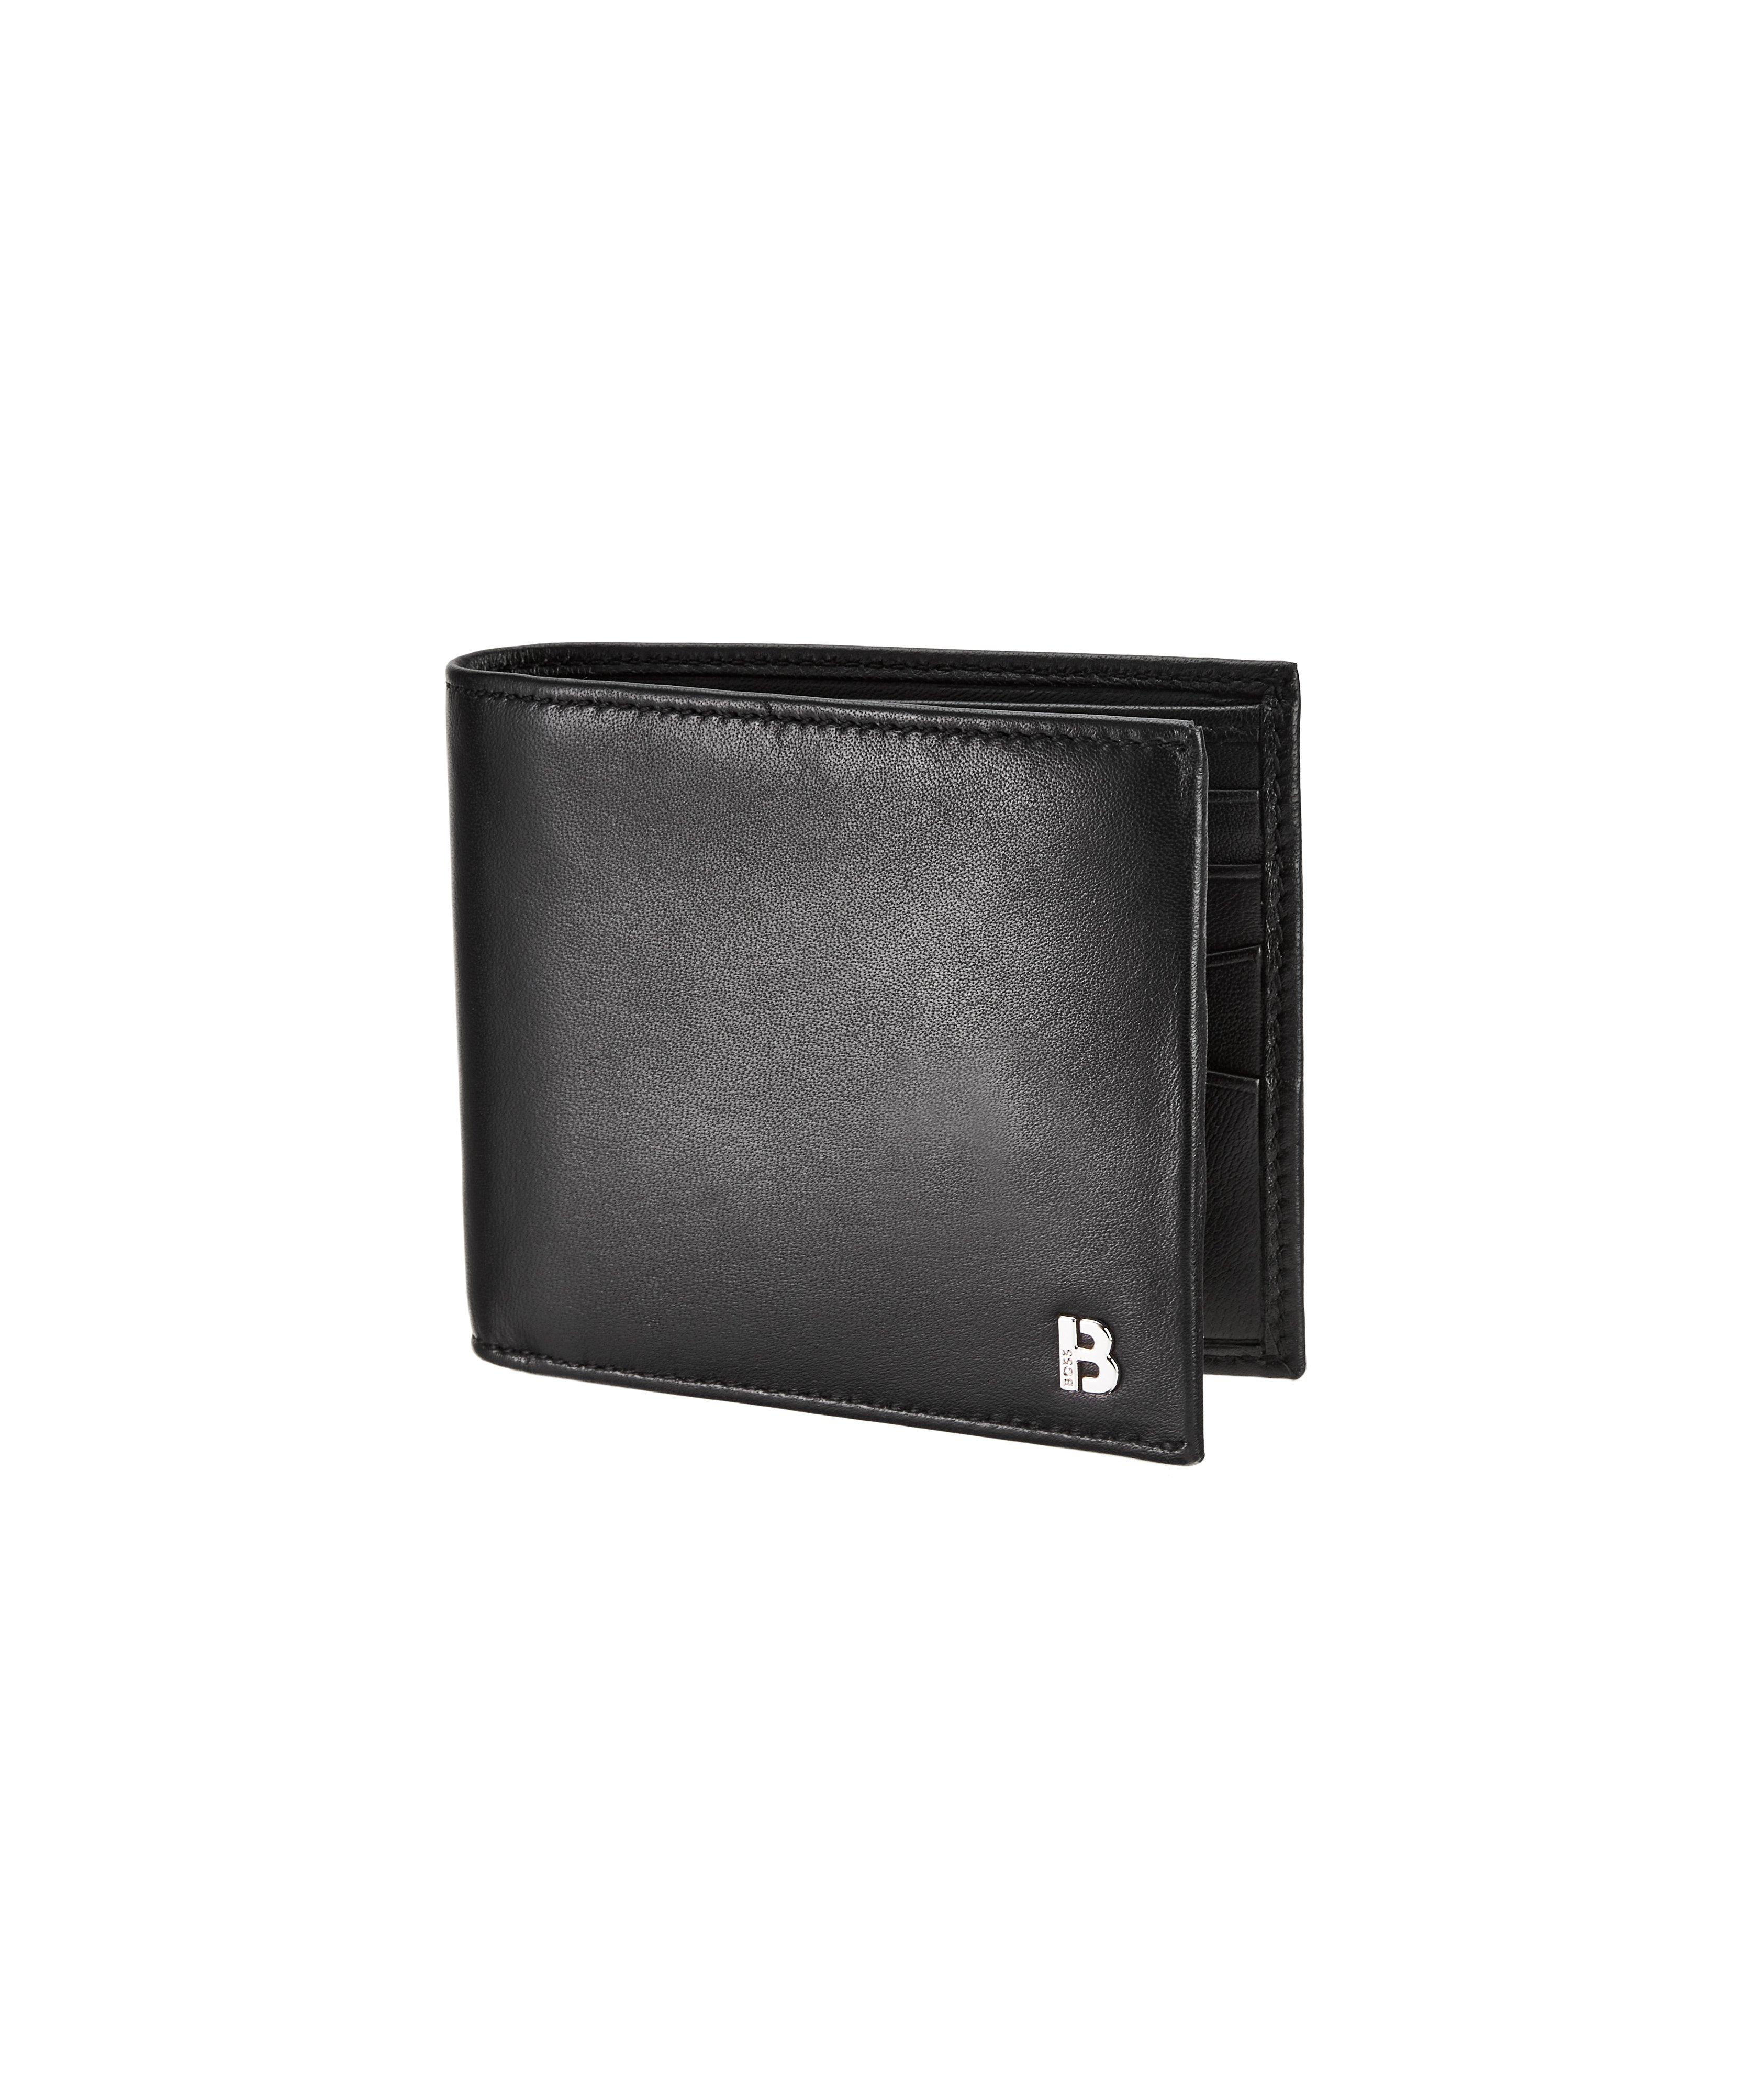 Micro Grained Leather Bifold Wallet image 0